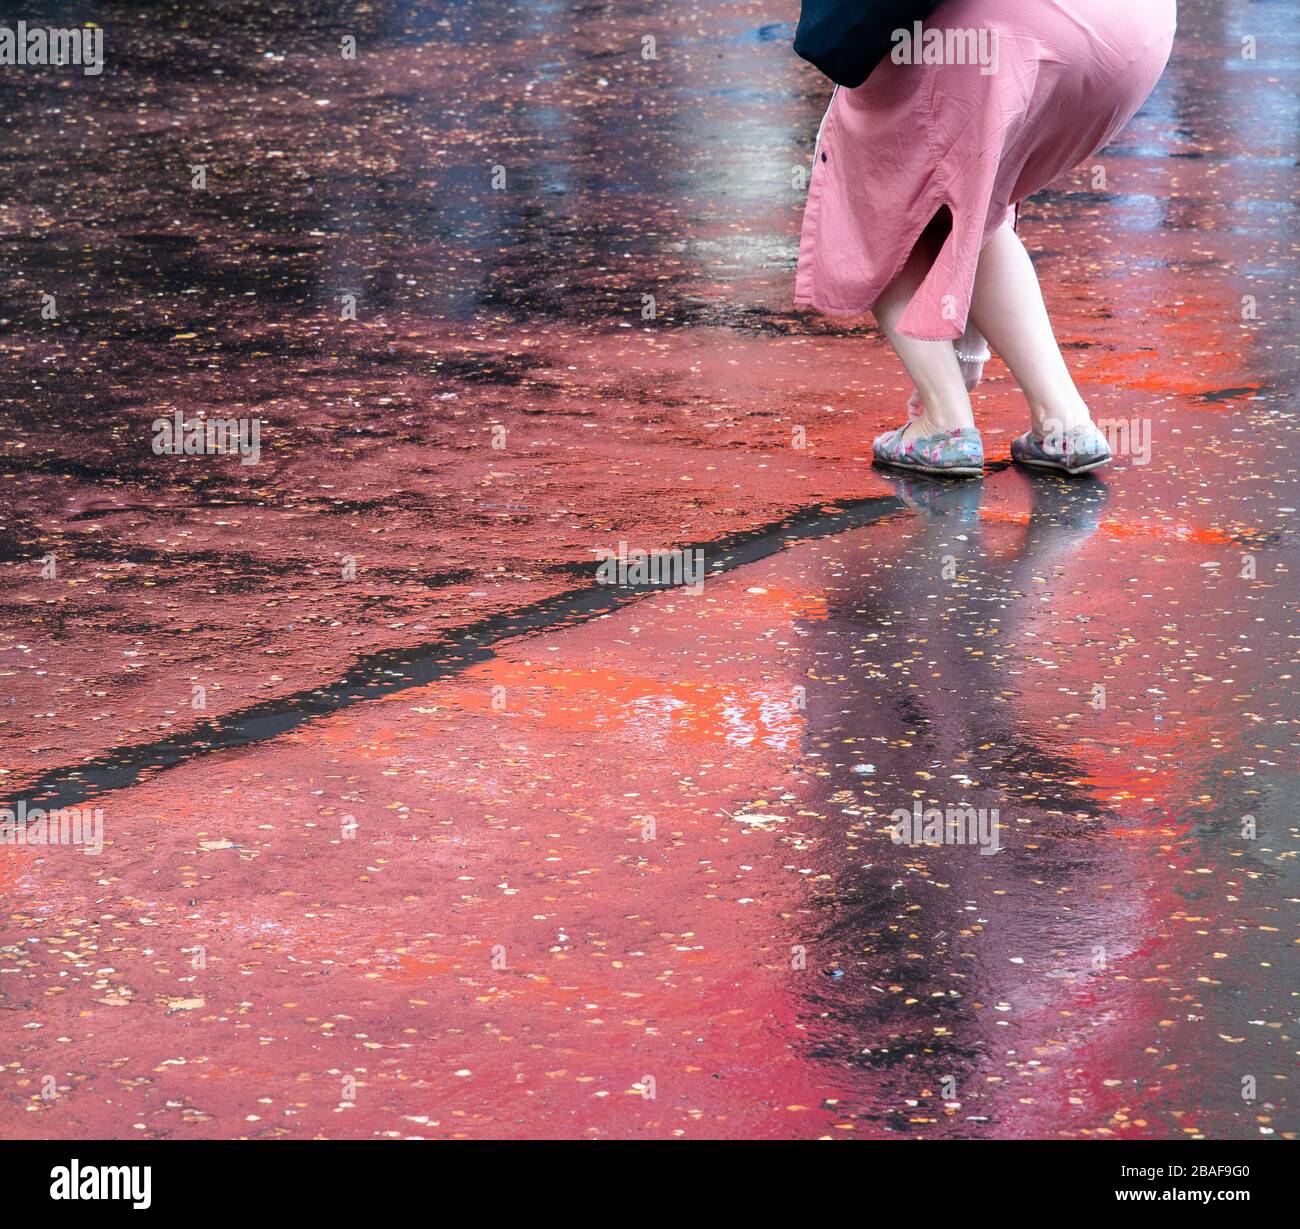 Reflection of woman in wet pavement Stock Photo